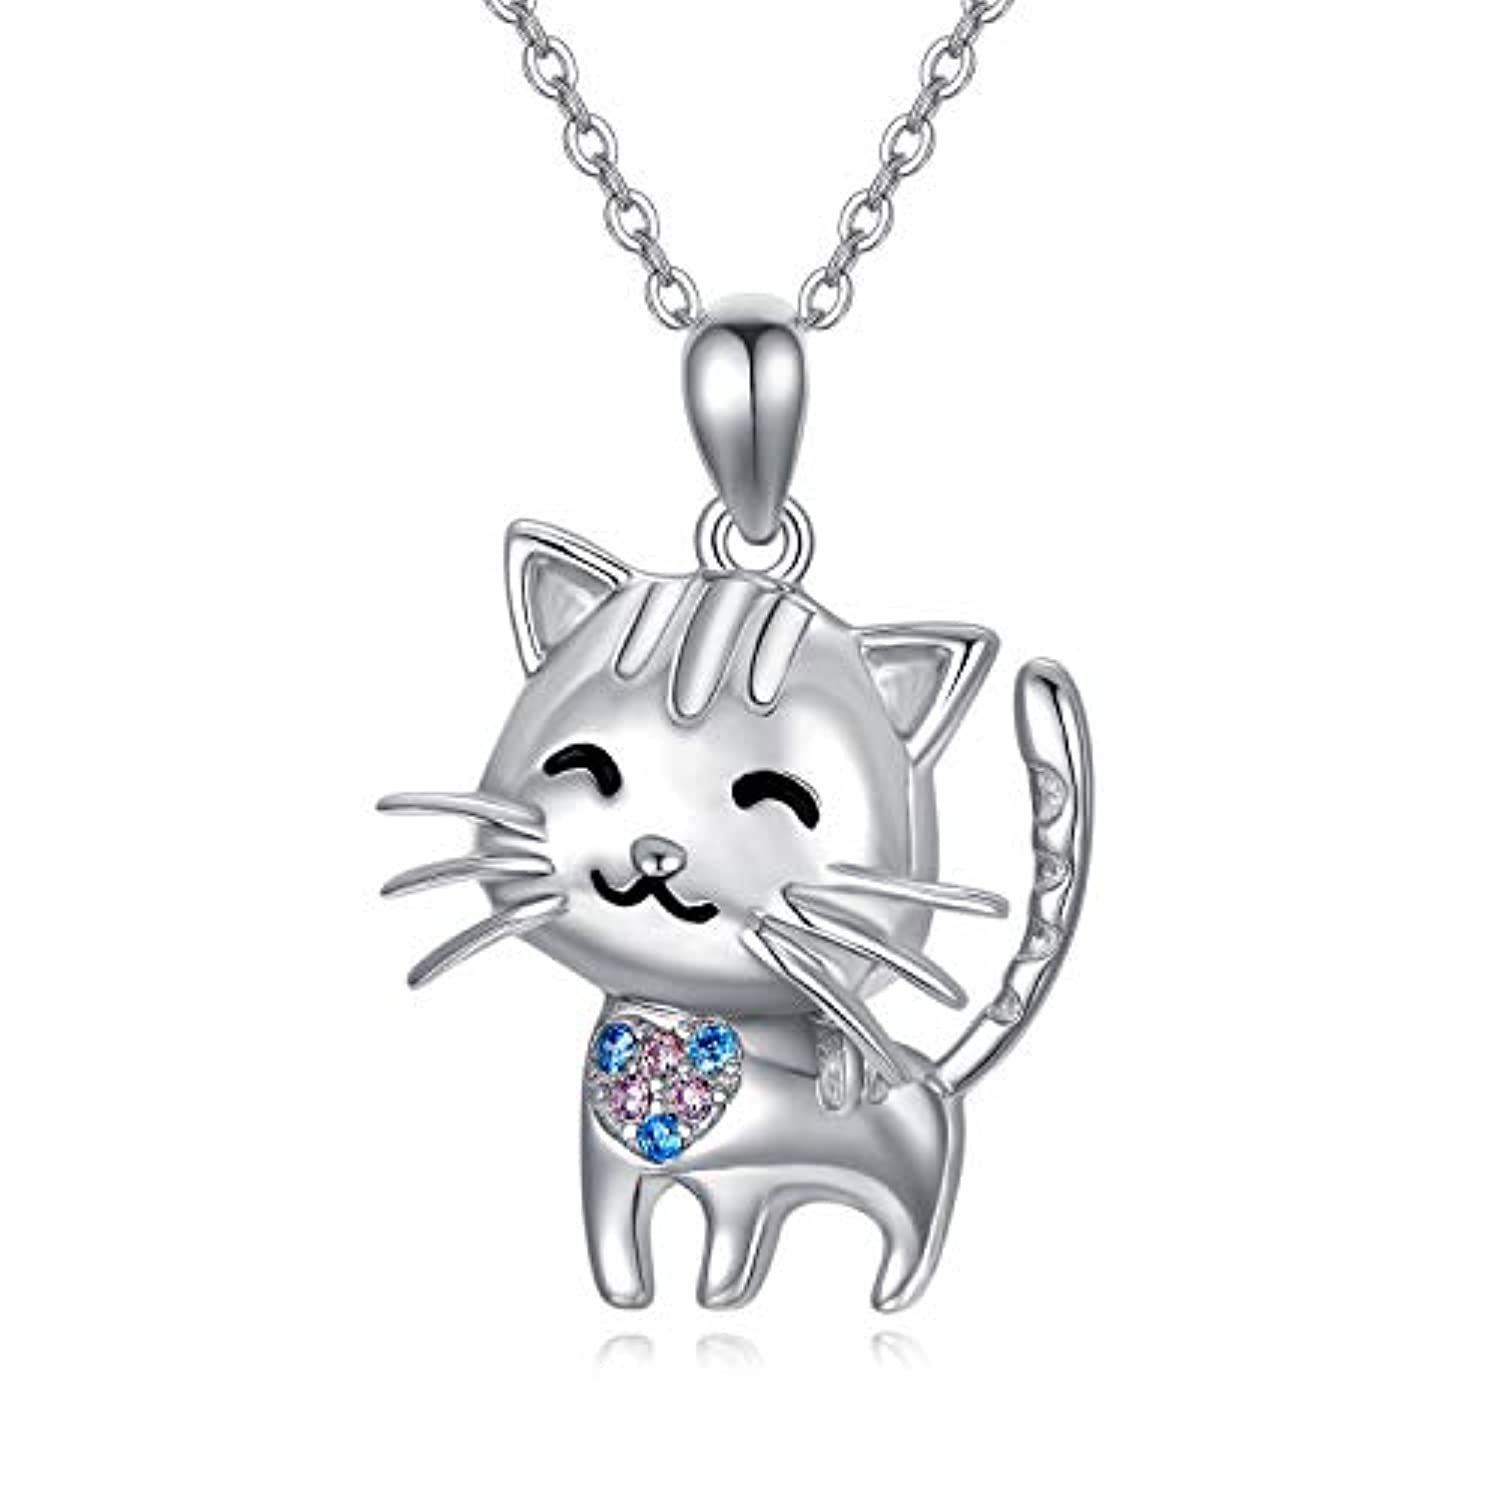 S925 Sterling silver Cute Cat Pendant Necklace Jewelry,Cubic Zircon Necklace for Women